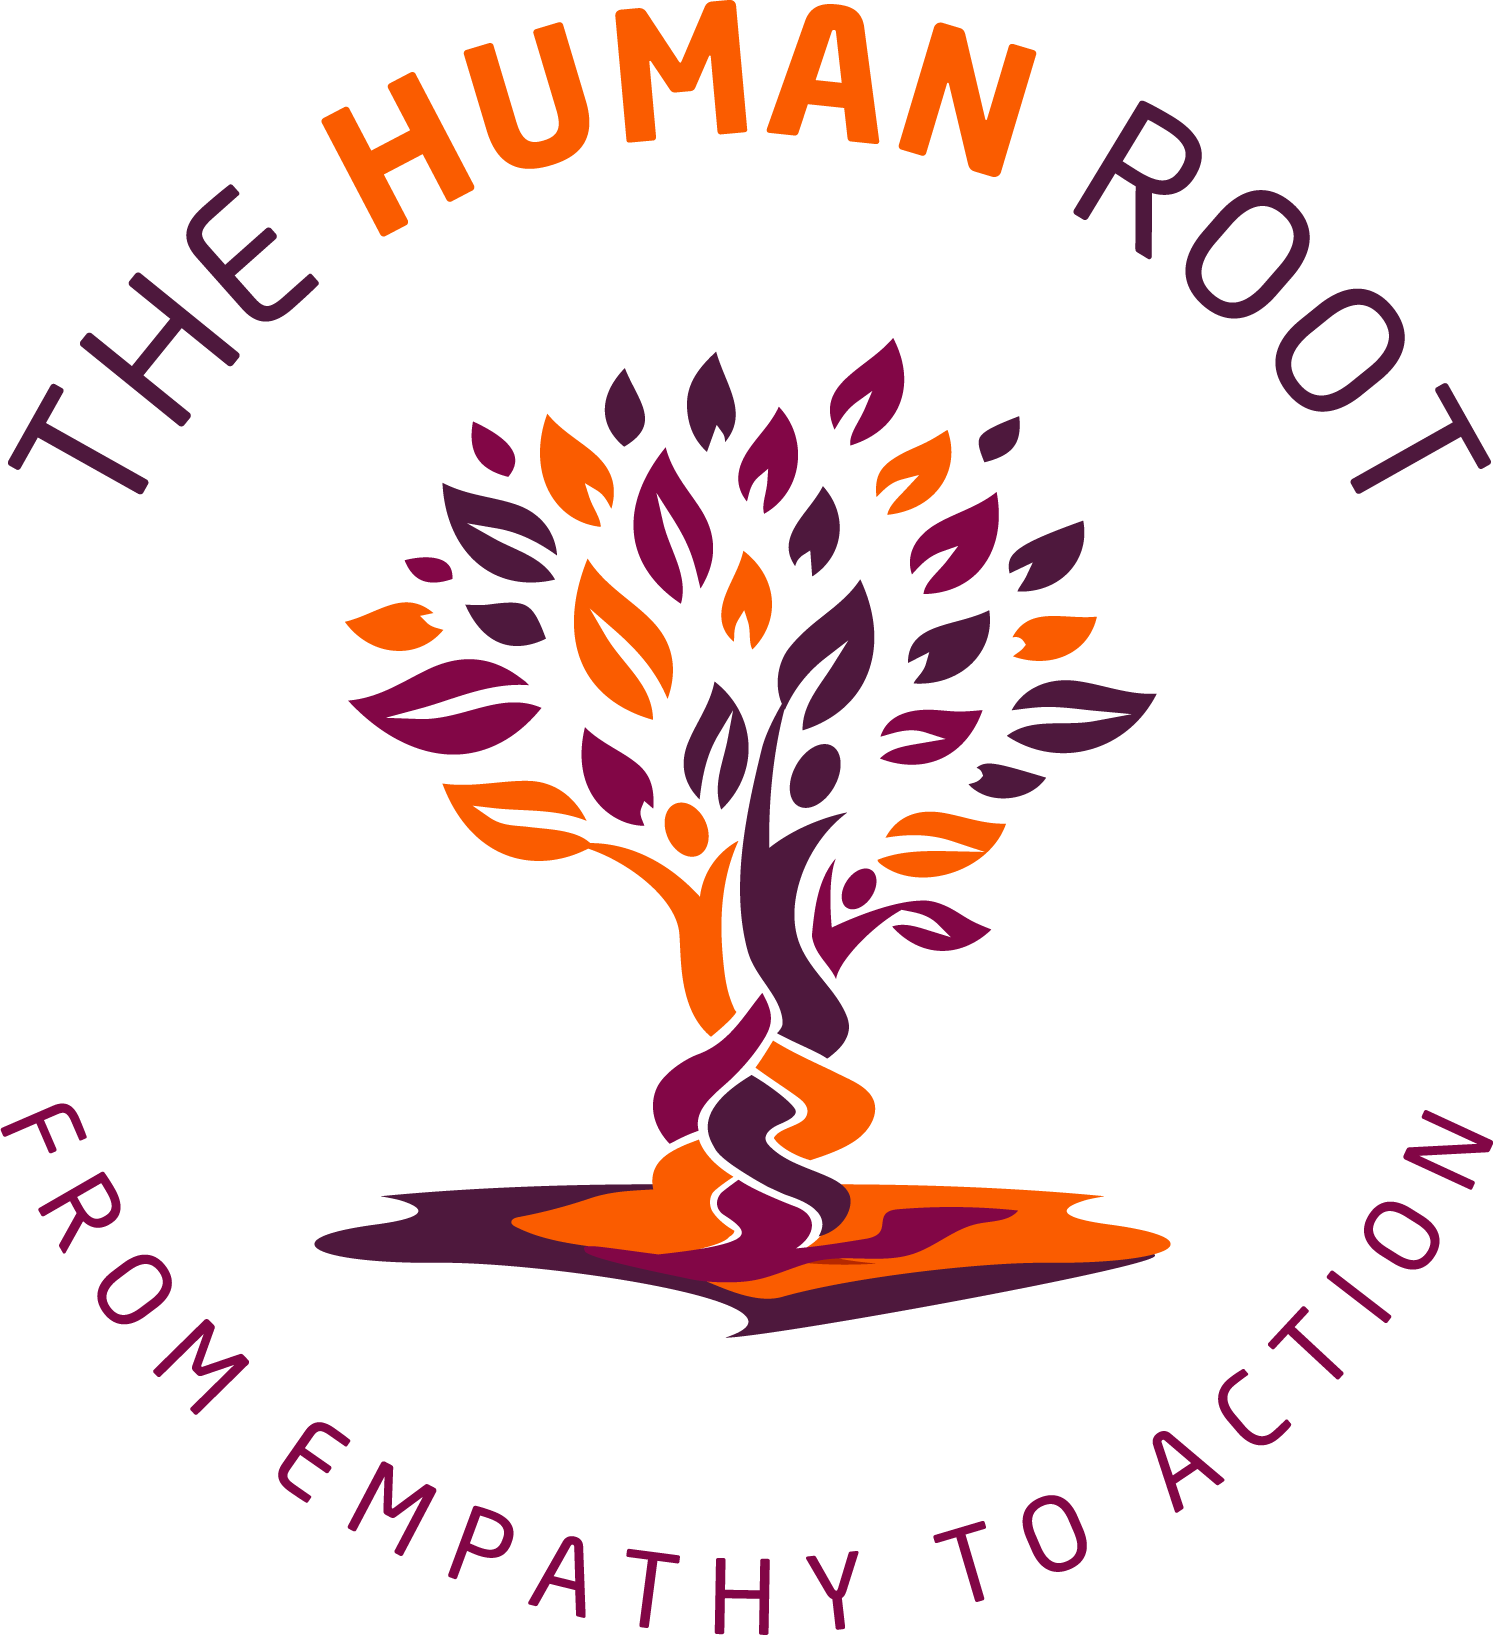 THE HUMAN ROOT